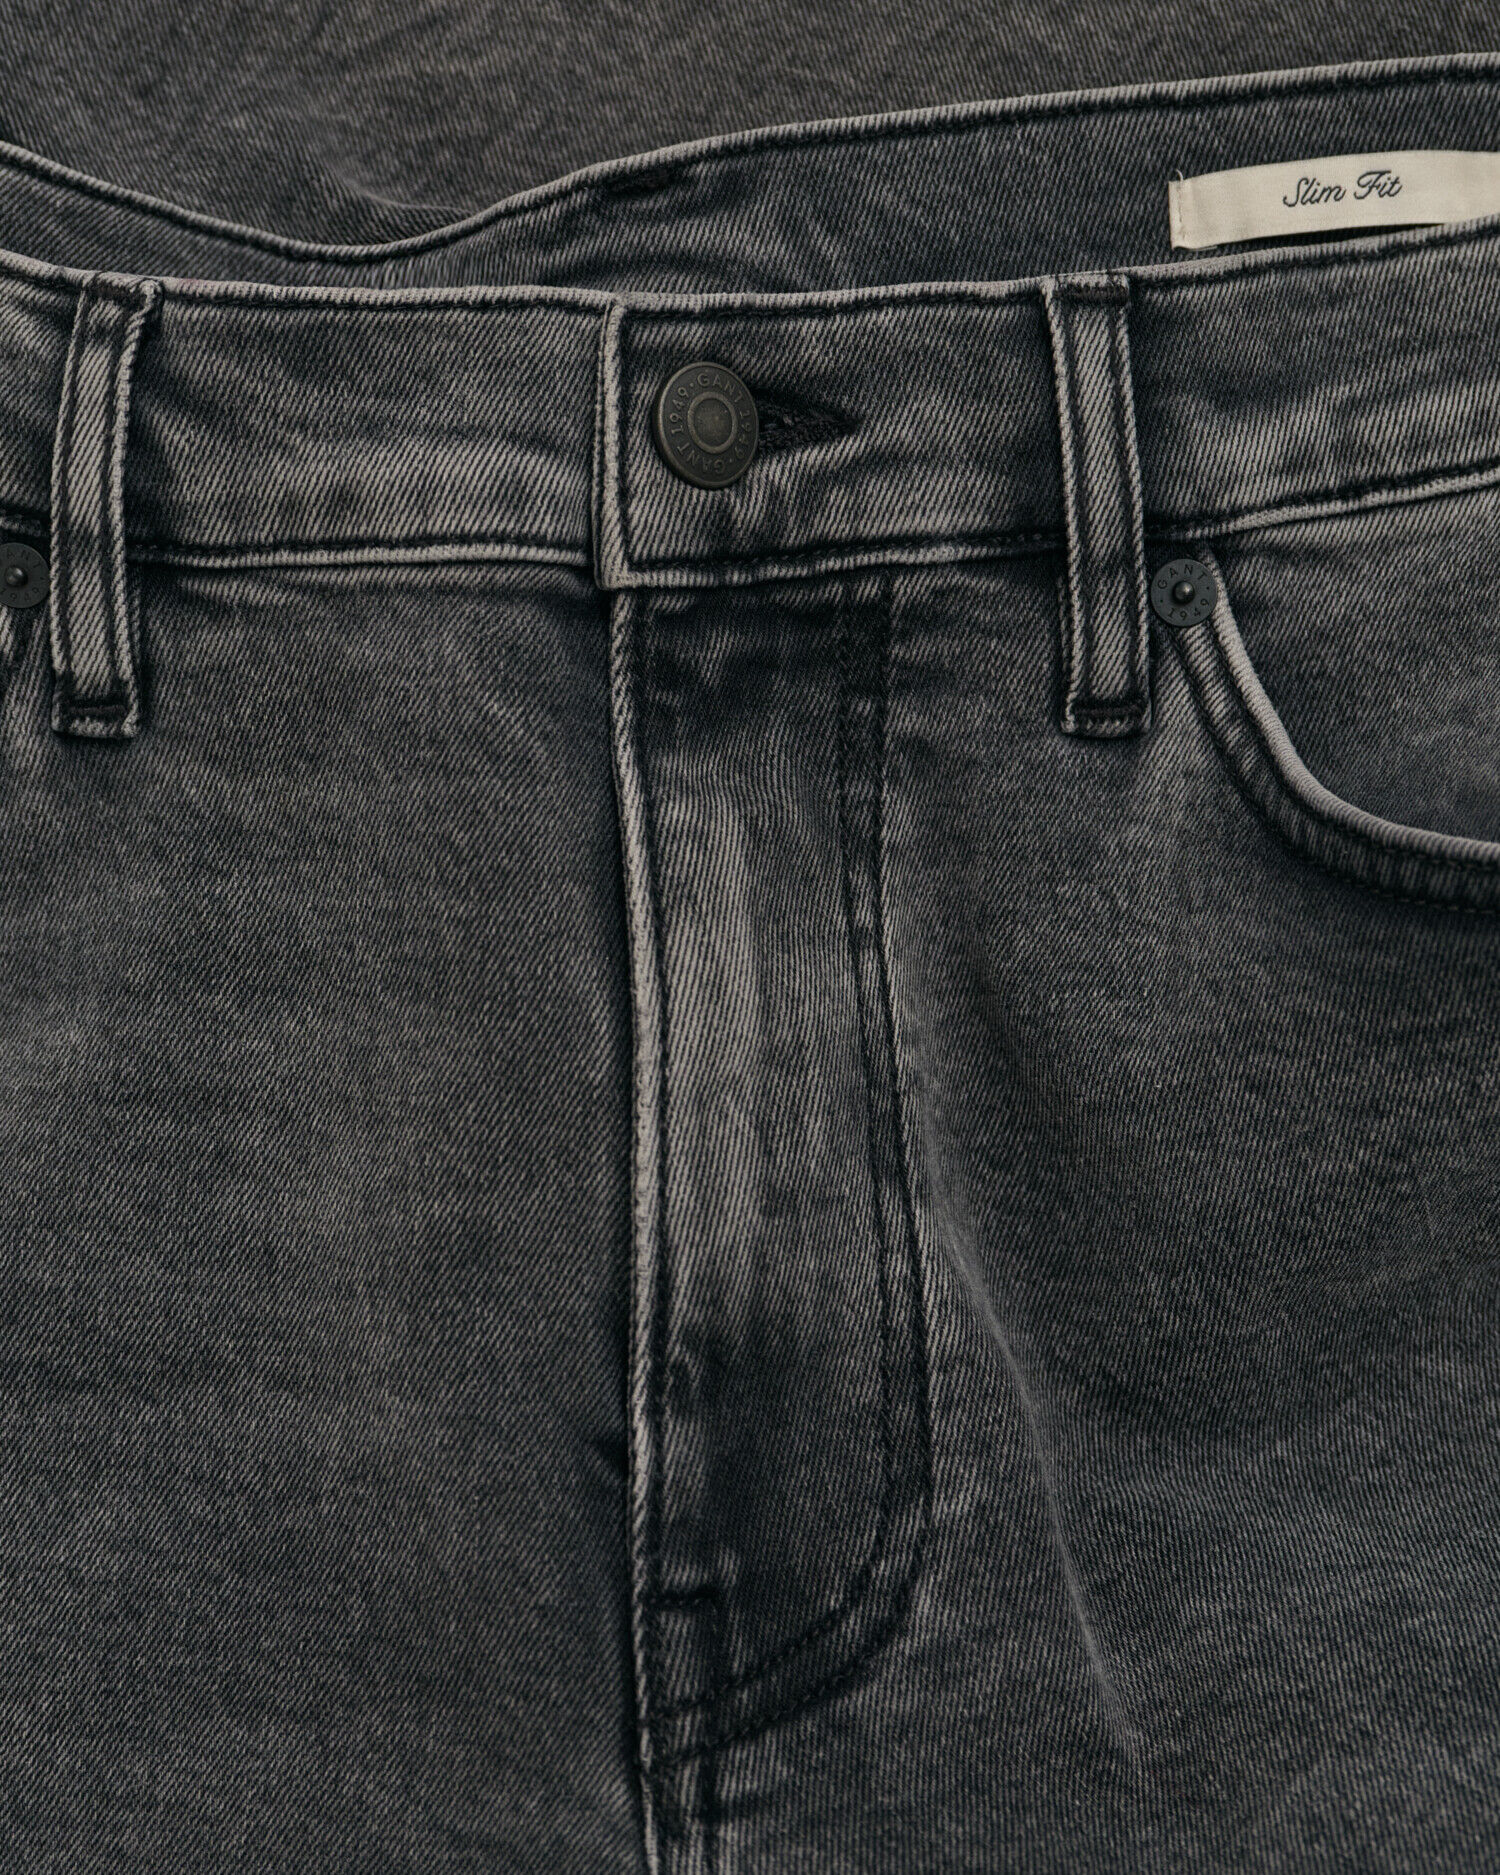 Denim Guide: Washes, Fit & How to Take Care - Farfetch